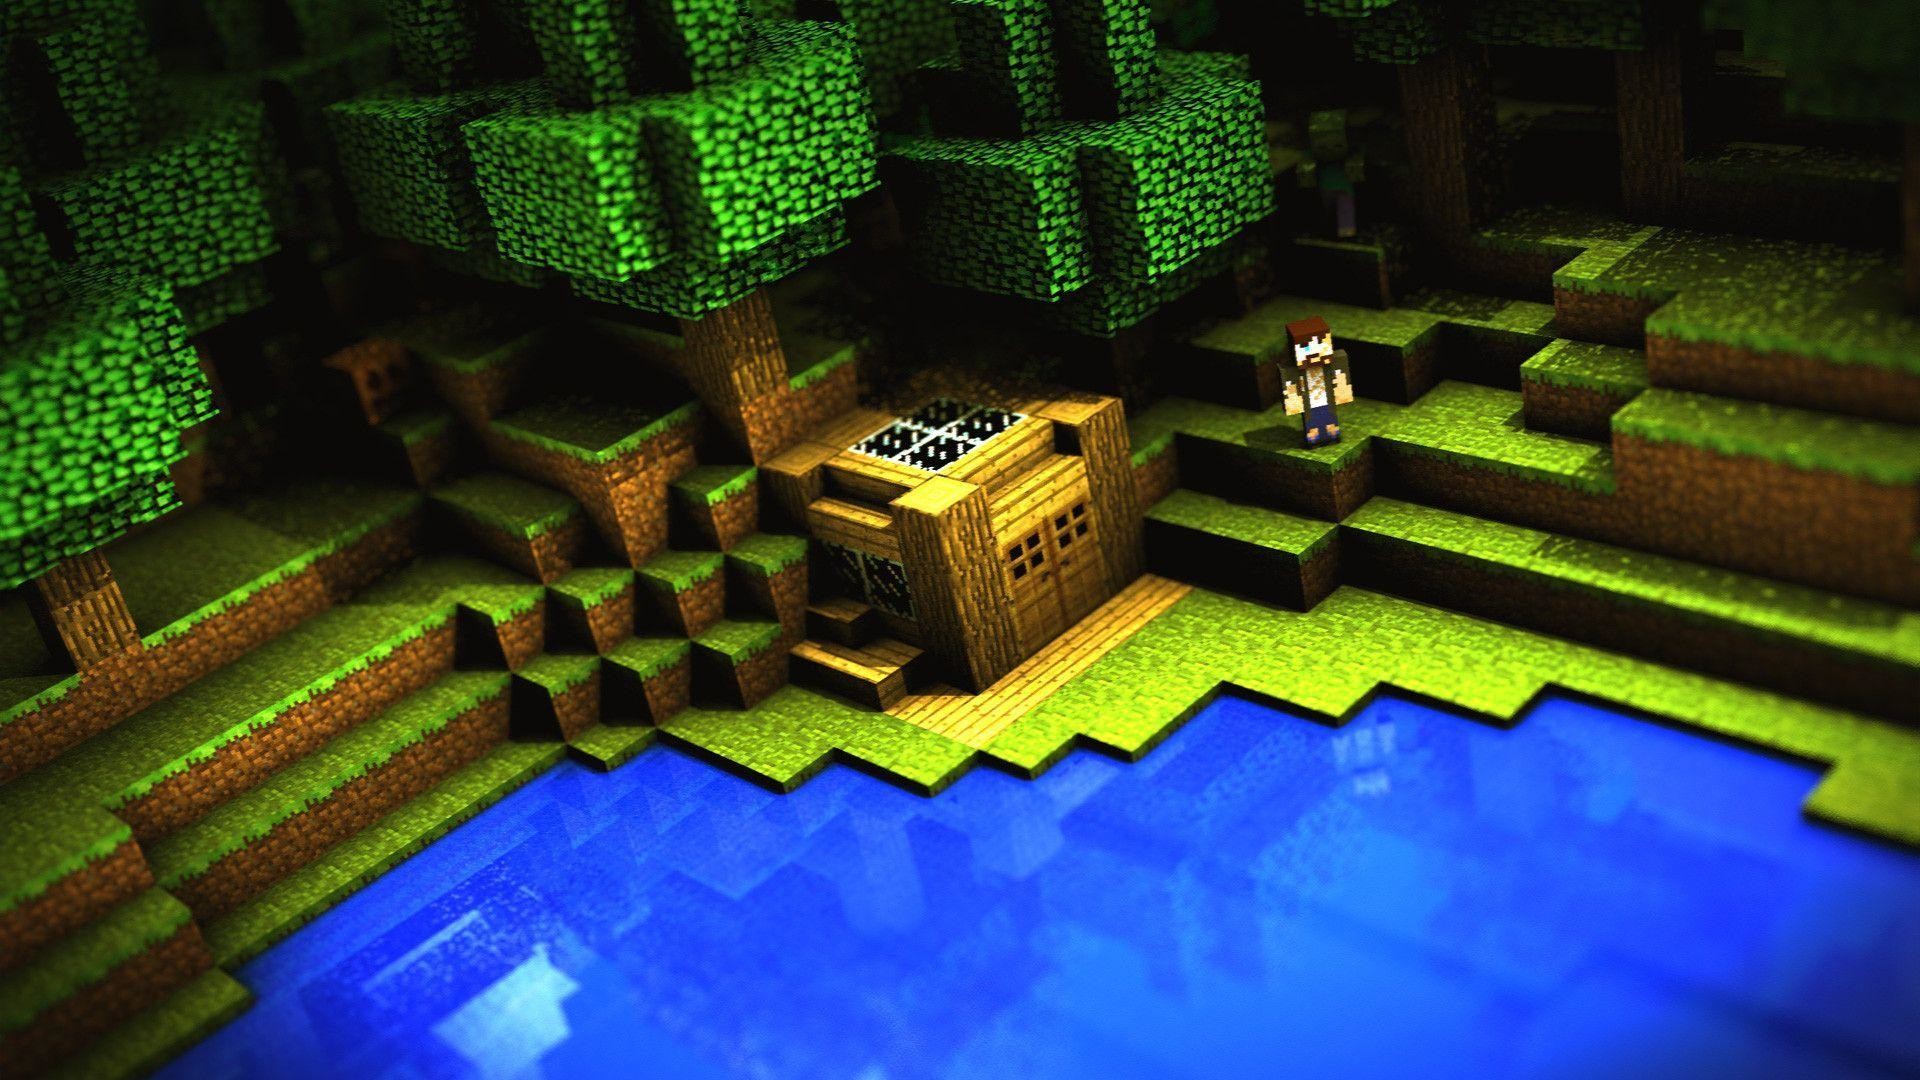 1920x1080 Wallpapers For > Cool Minecraft Wallpapers  Hd